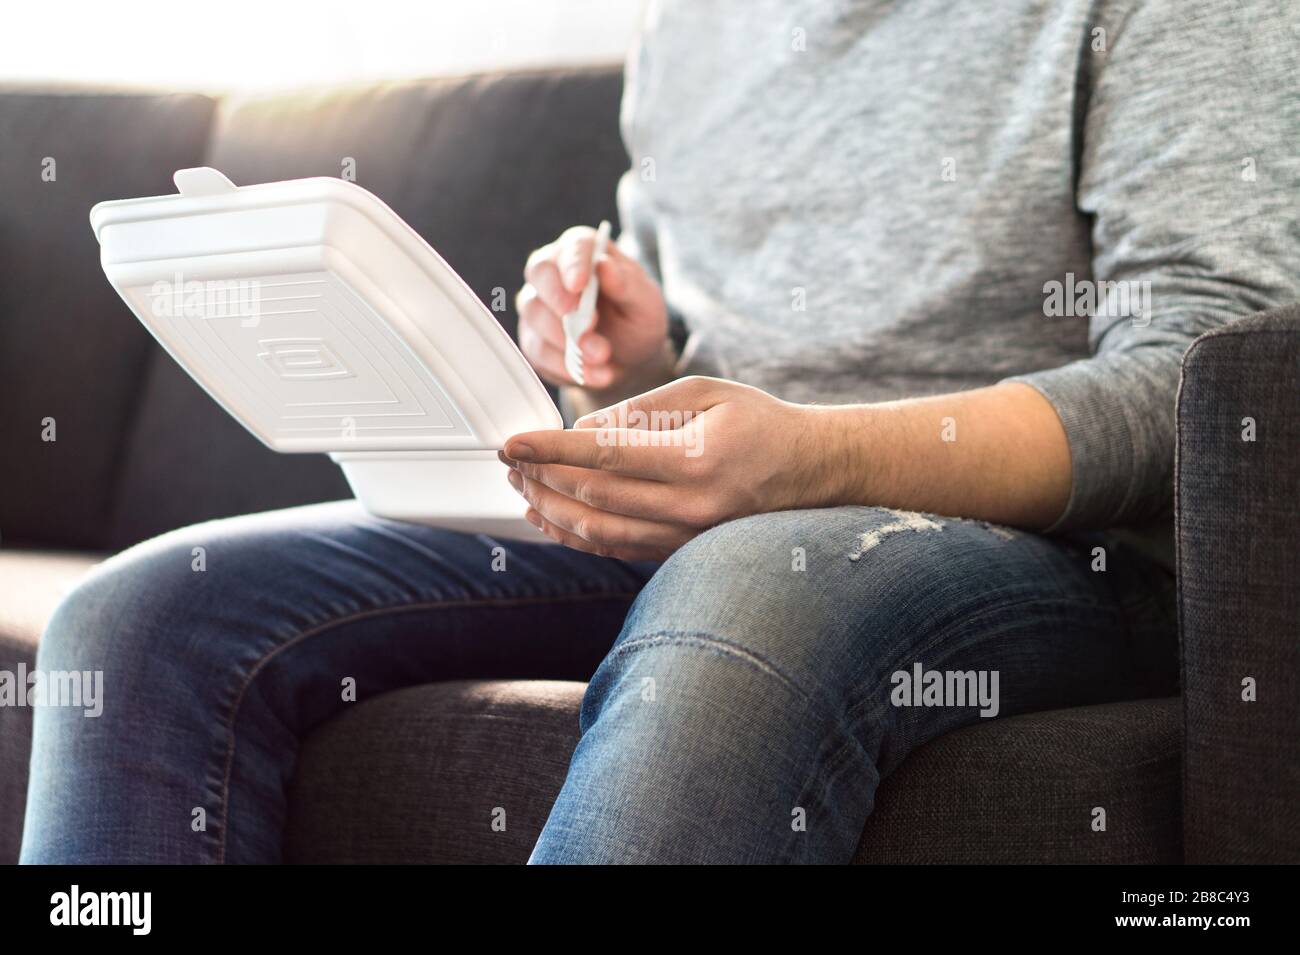 Man eating fast food from take away box home on couch. Takeout dinner from chinese or junk food restaurant. Guy enjoying kebab or salad. Stock Photo